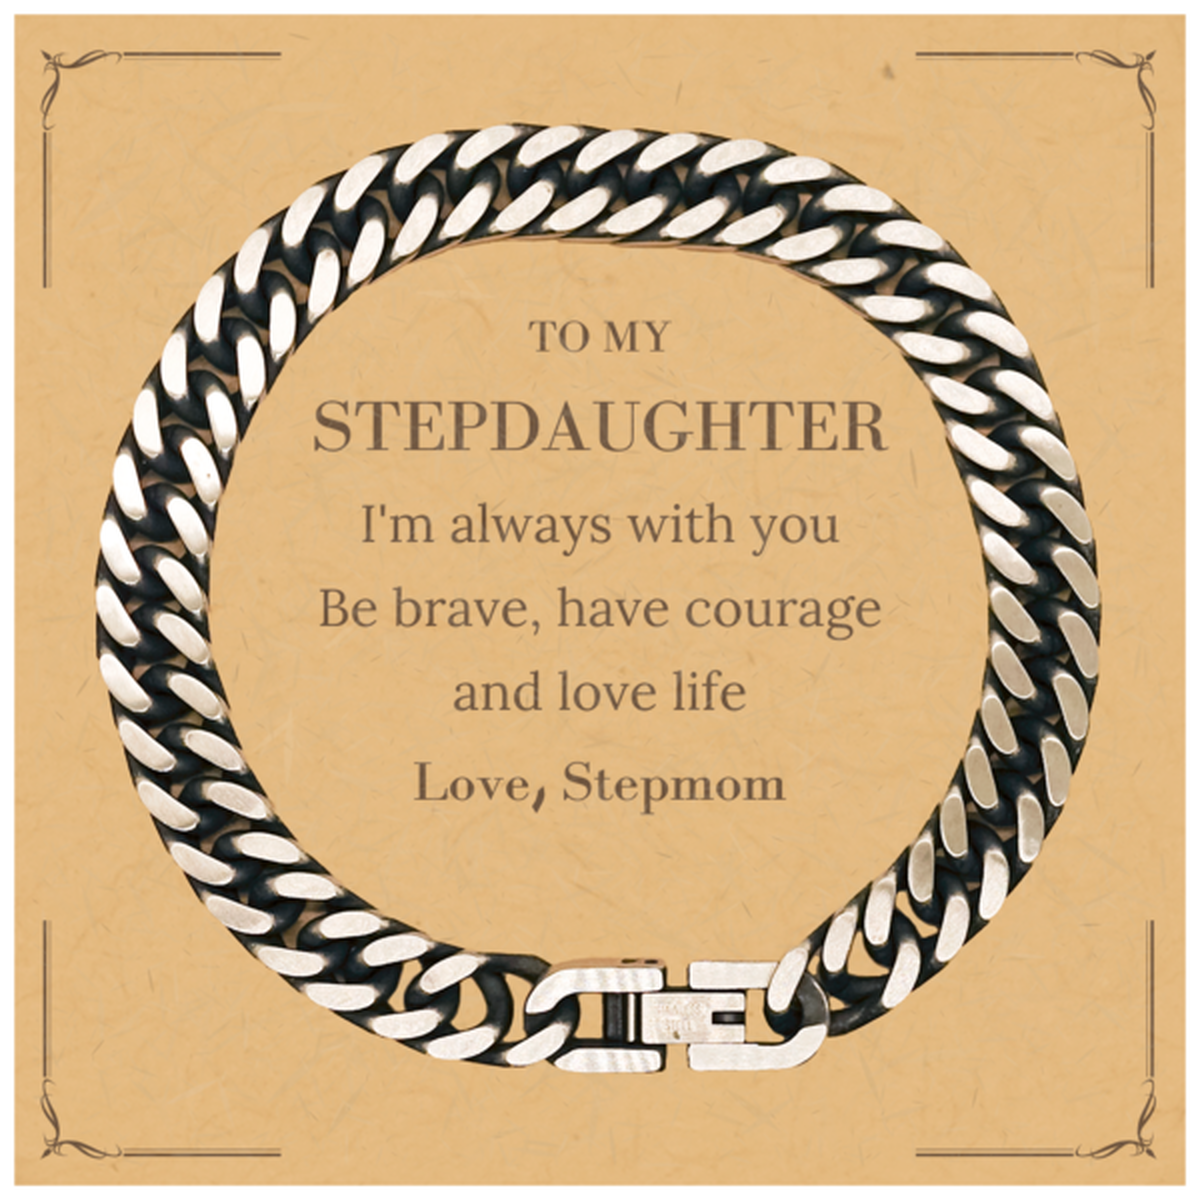 To My Stepdaughter Gifts from Stepmom, Unique Cuban Link Chain Bracelet Inspirational Christmas Birthday Graduation Gifts for Stepdaughter I'm always with you. Be brave, have courage and love life. Love, Stepmom